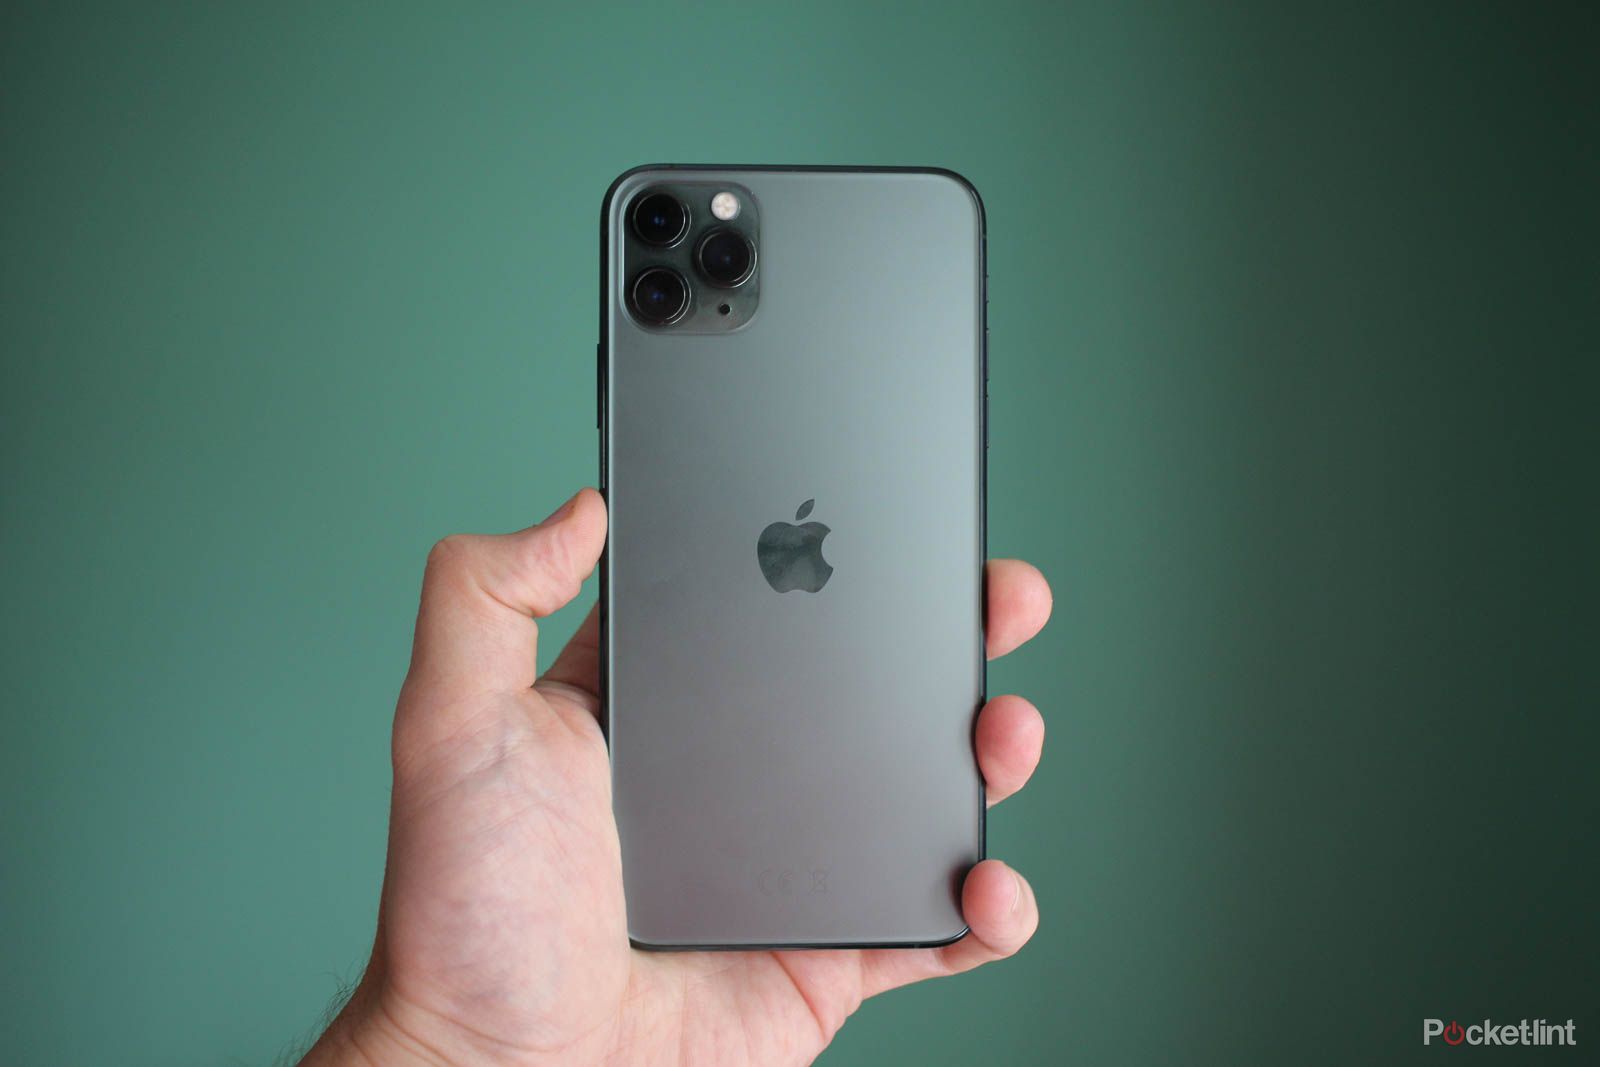 How to turn off Apples U1 location-tracking chip in iPhone 11 image 1